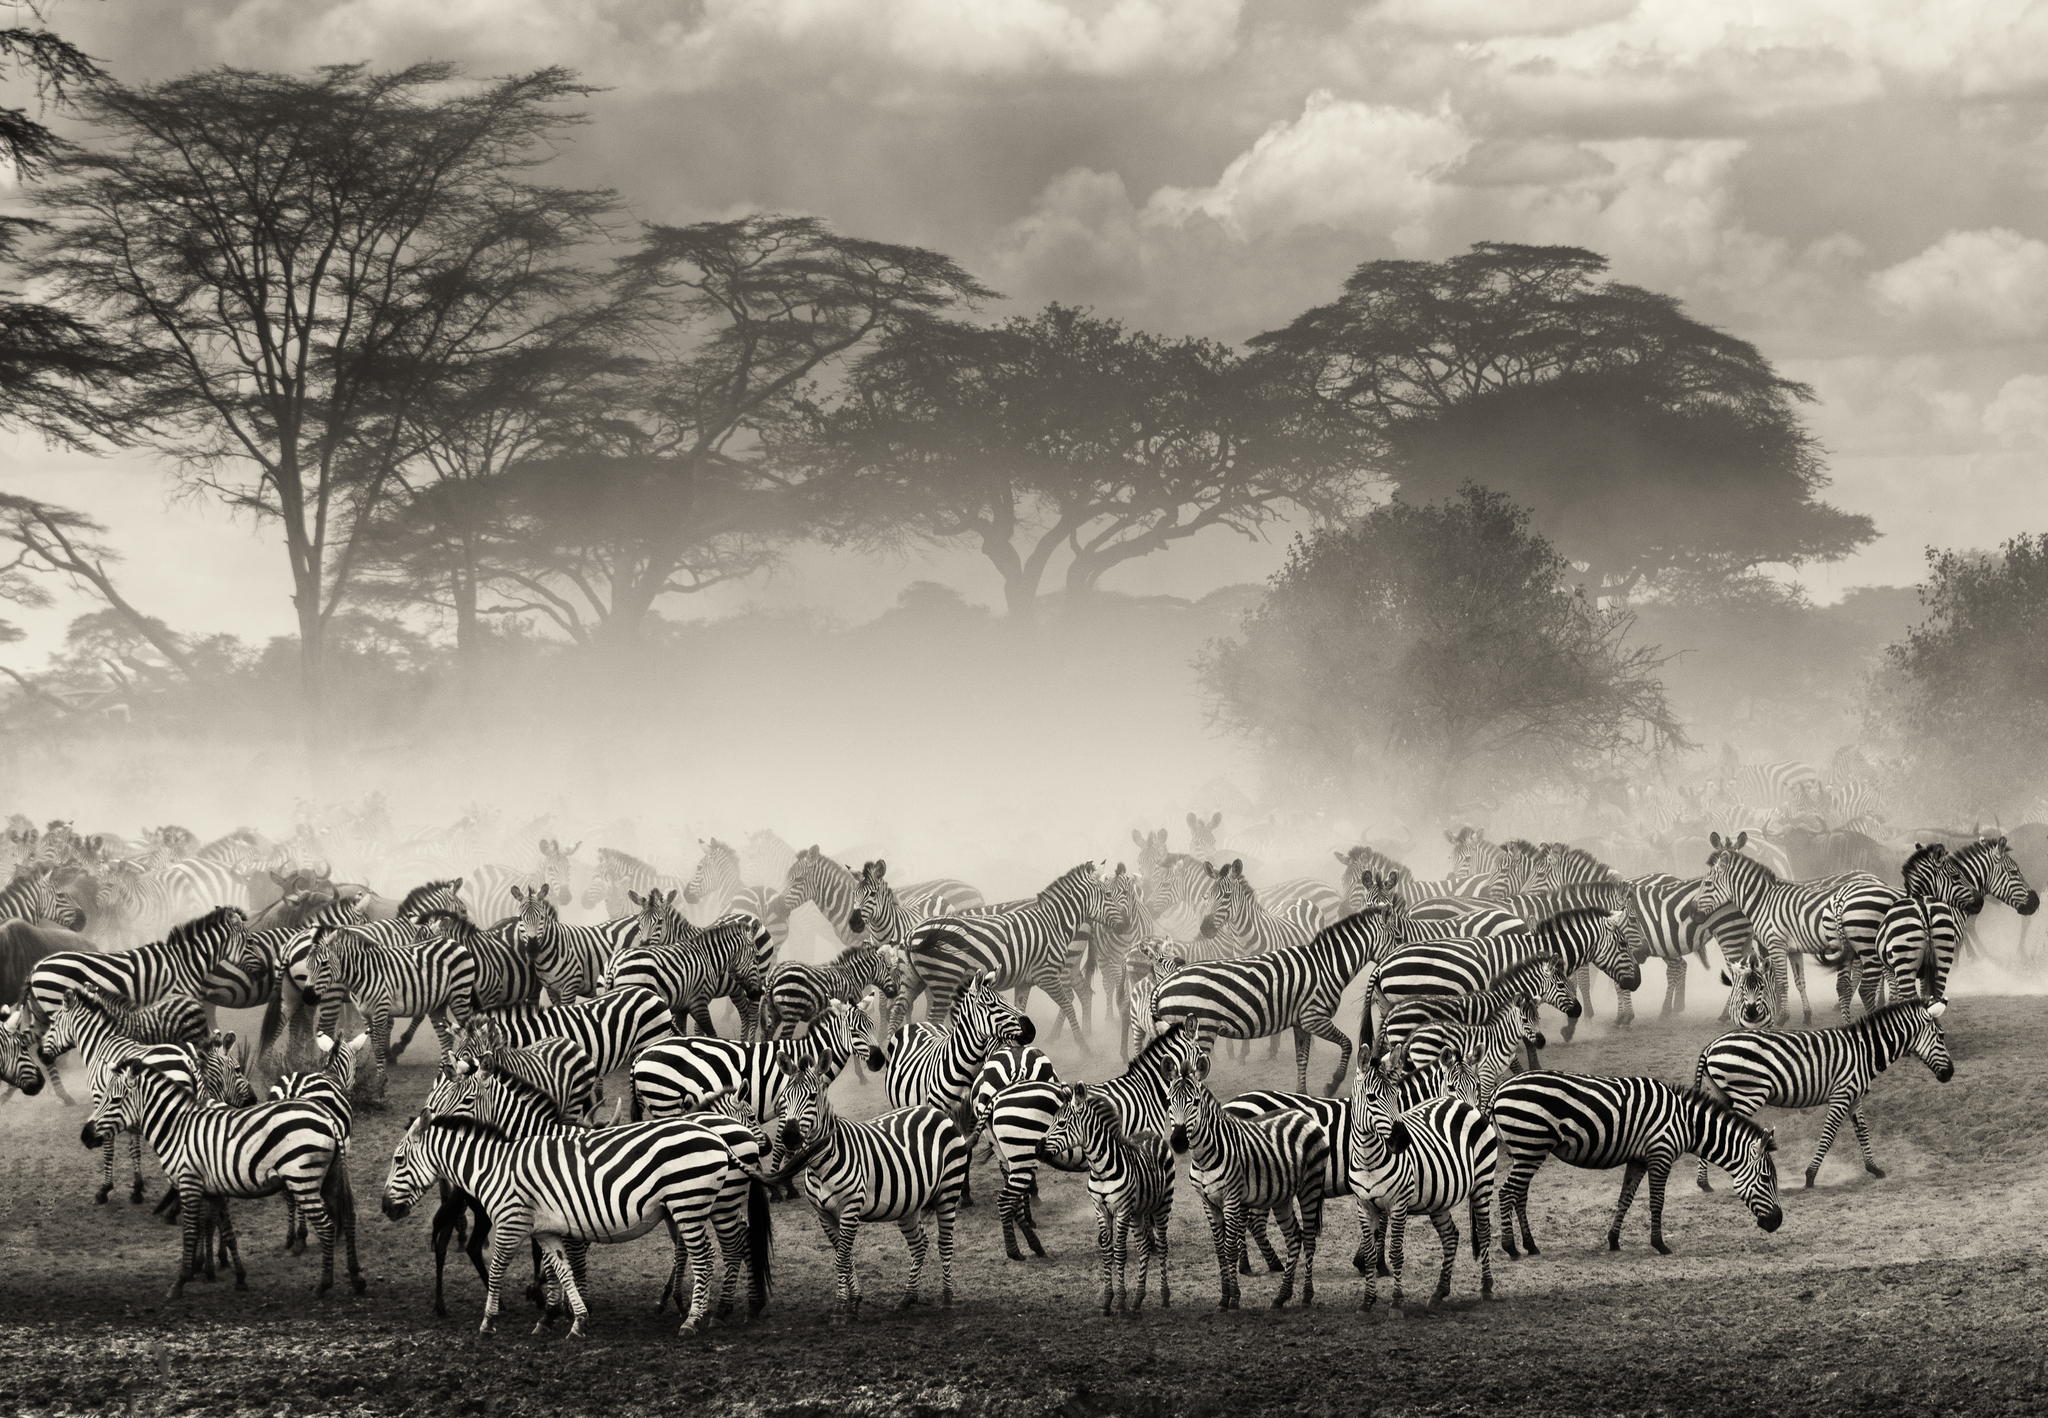 50 Most Incredible Photos Of Animal Migration